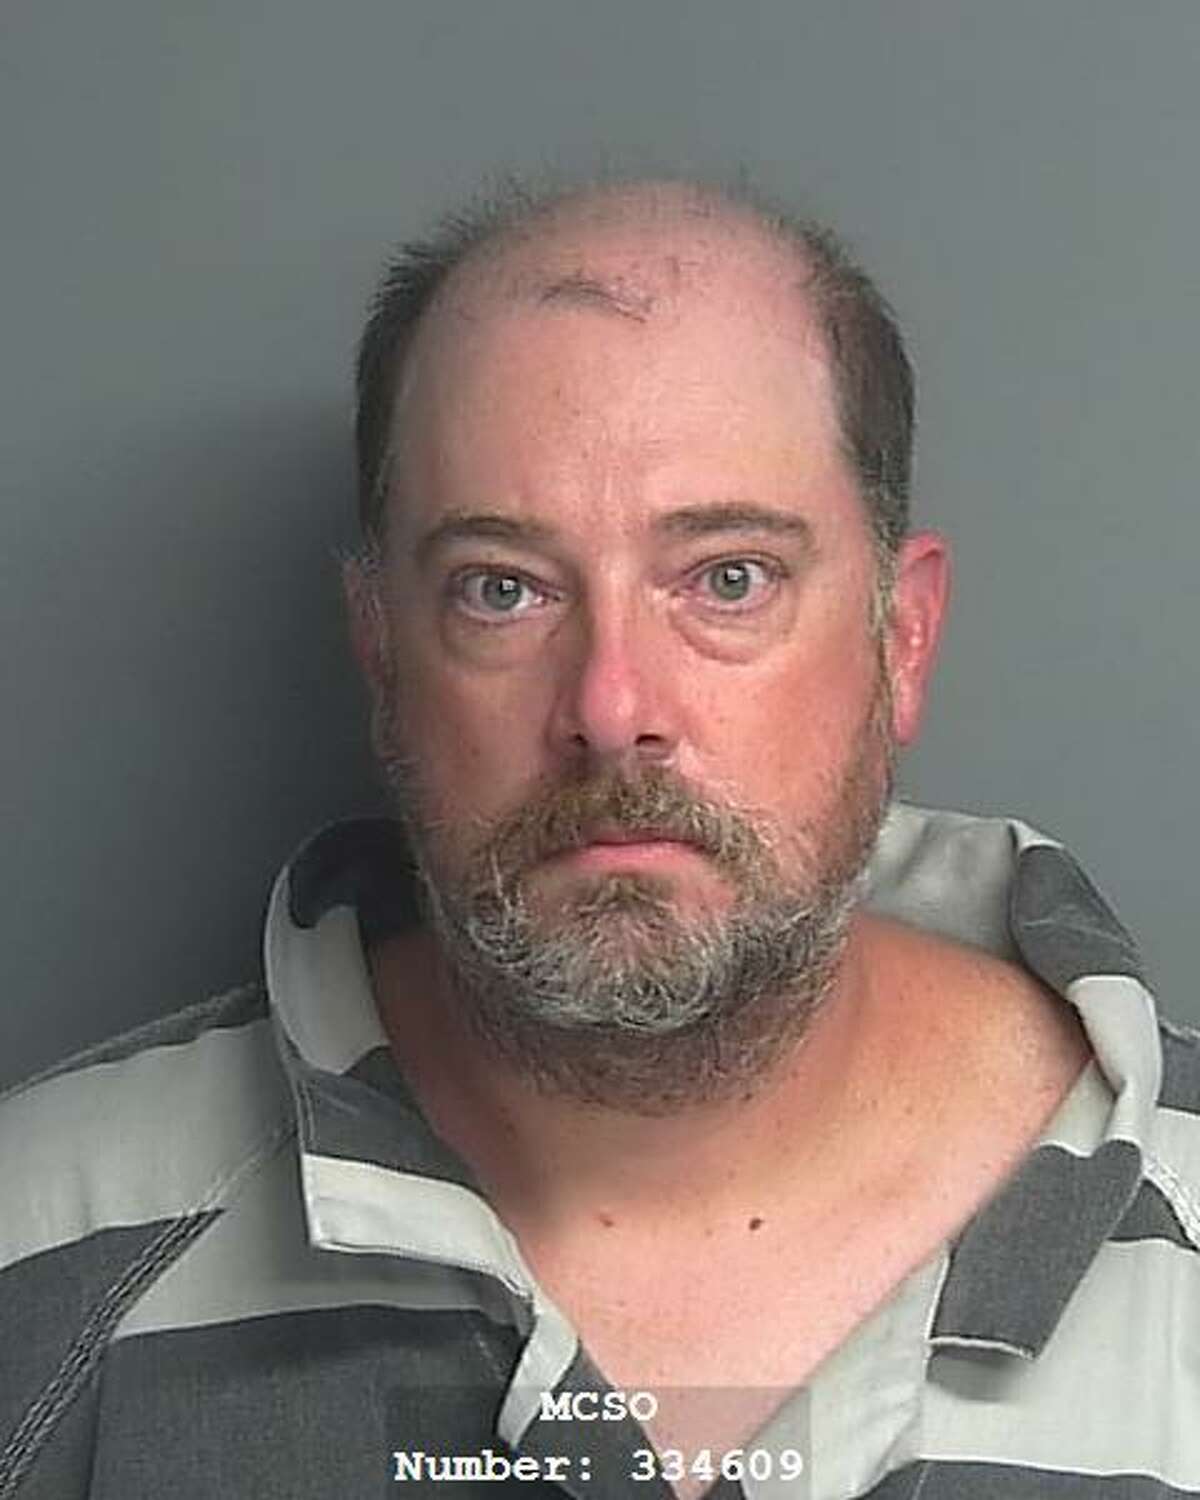 James Lee Browning, 47, of Churobusco, Ind., was convicted of promotion of child pornography, a second-degree felony.